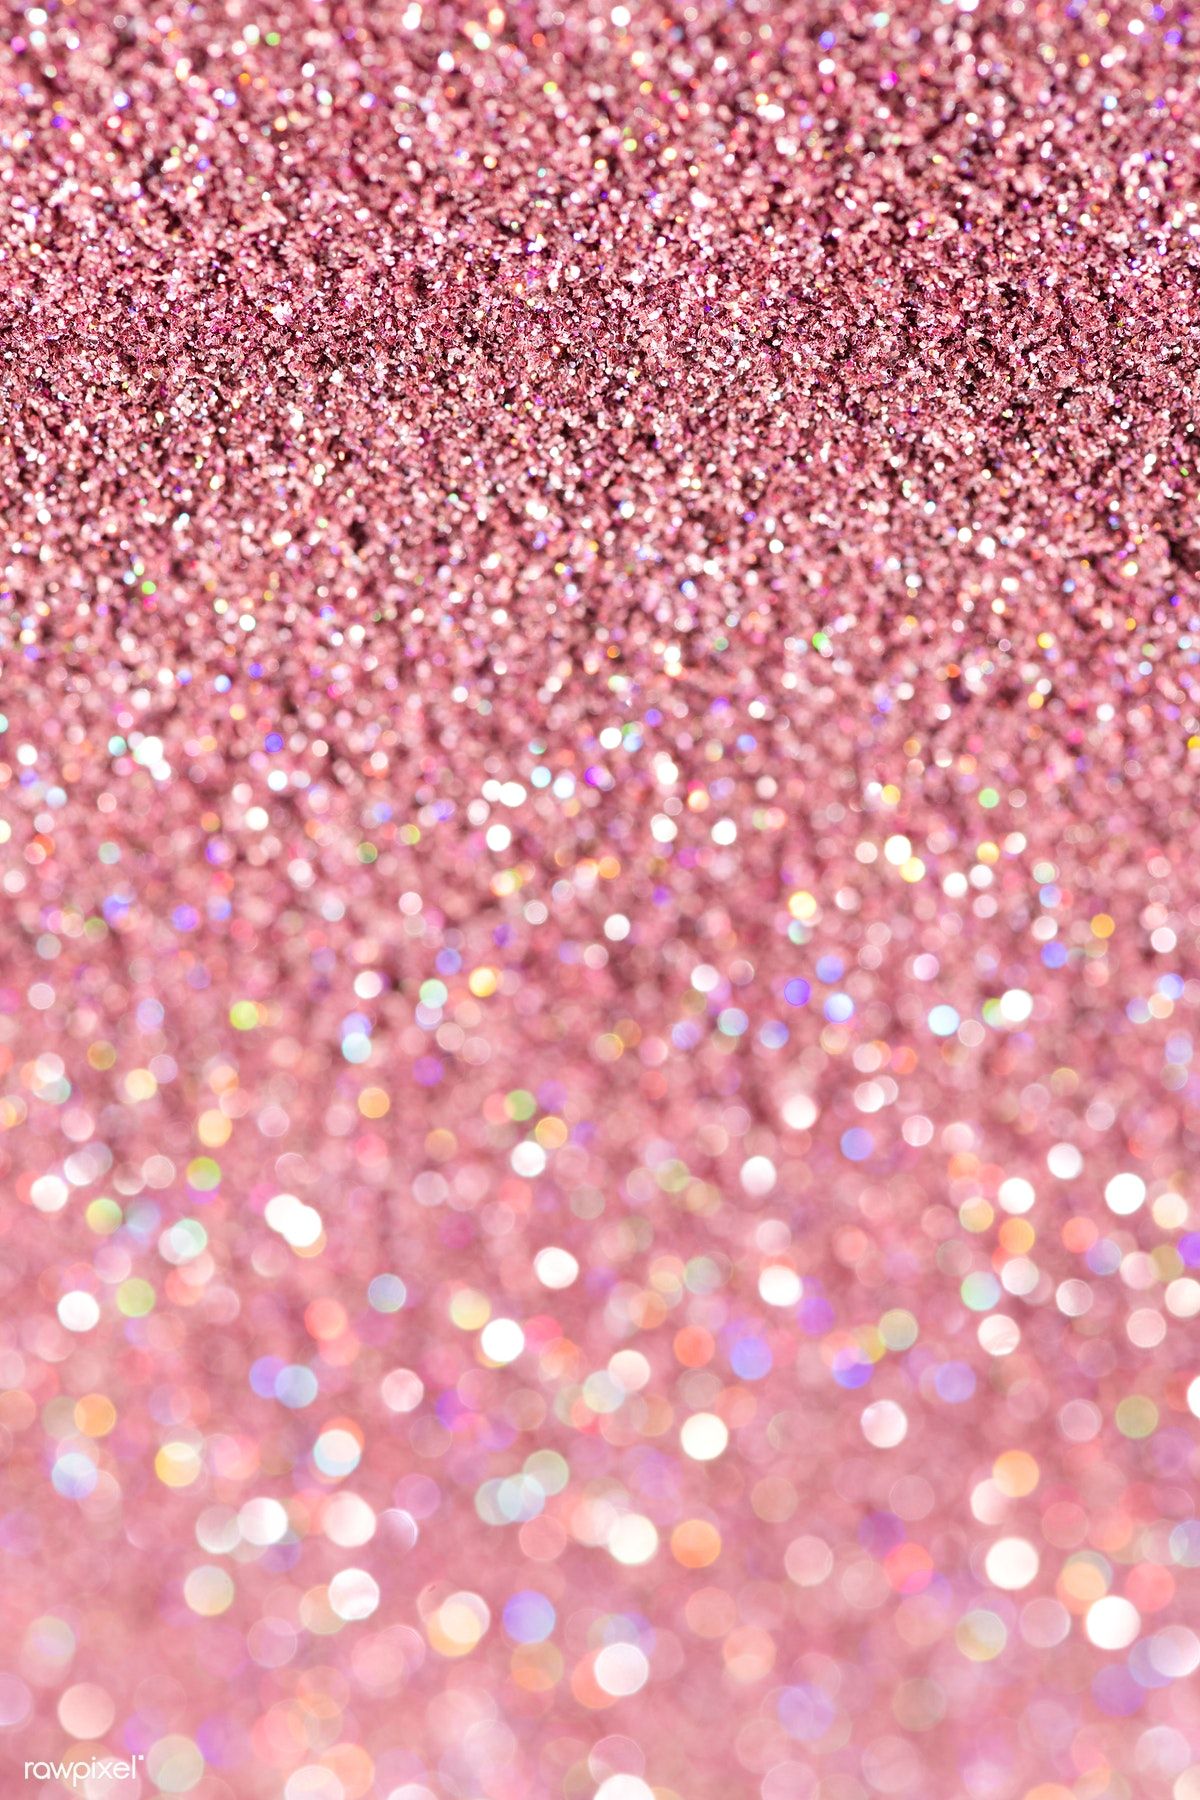 Shiny pink glitter textured background. free image / Teddy Rawpixel. Pink wallpaper background, Pink glitter background, Glitter phone wallpaper